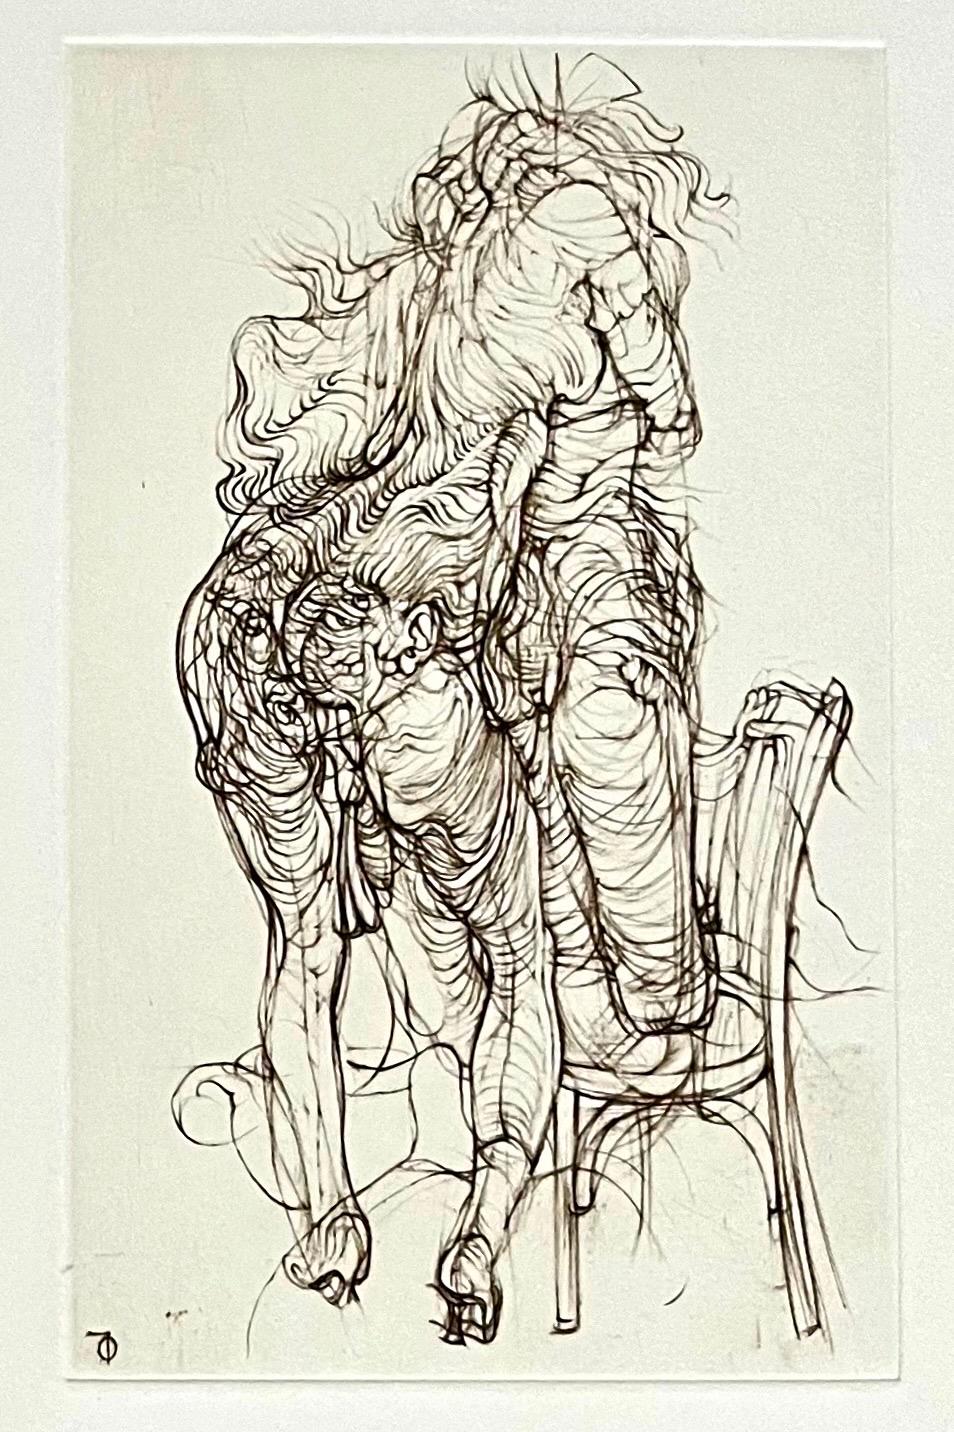 After Hans Bellmer (German, 1902-1975) 
Surrealist engraving, etching
after drawings from a 1942 notebook, 
engraved in 1974-75 by Cecile Reims
Printed by L'Atelier de Chalcographie du Louvre, Paris, 
Having printed monogram lower left in plate,